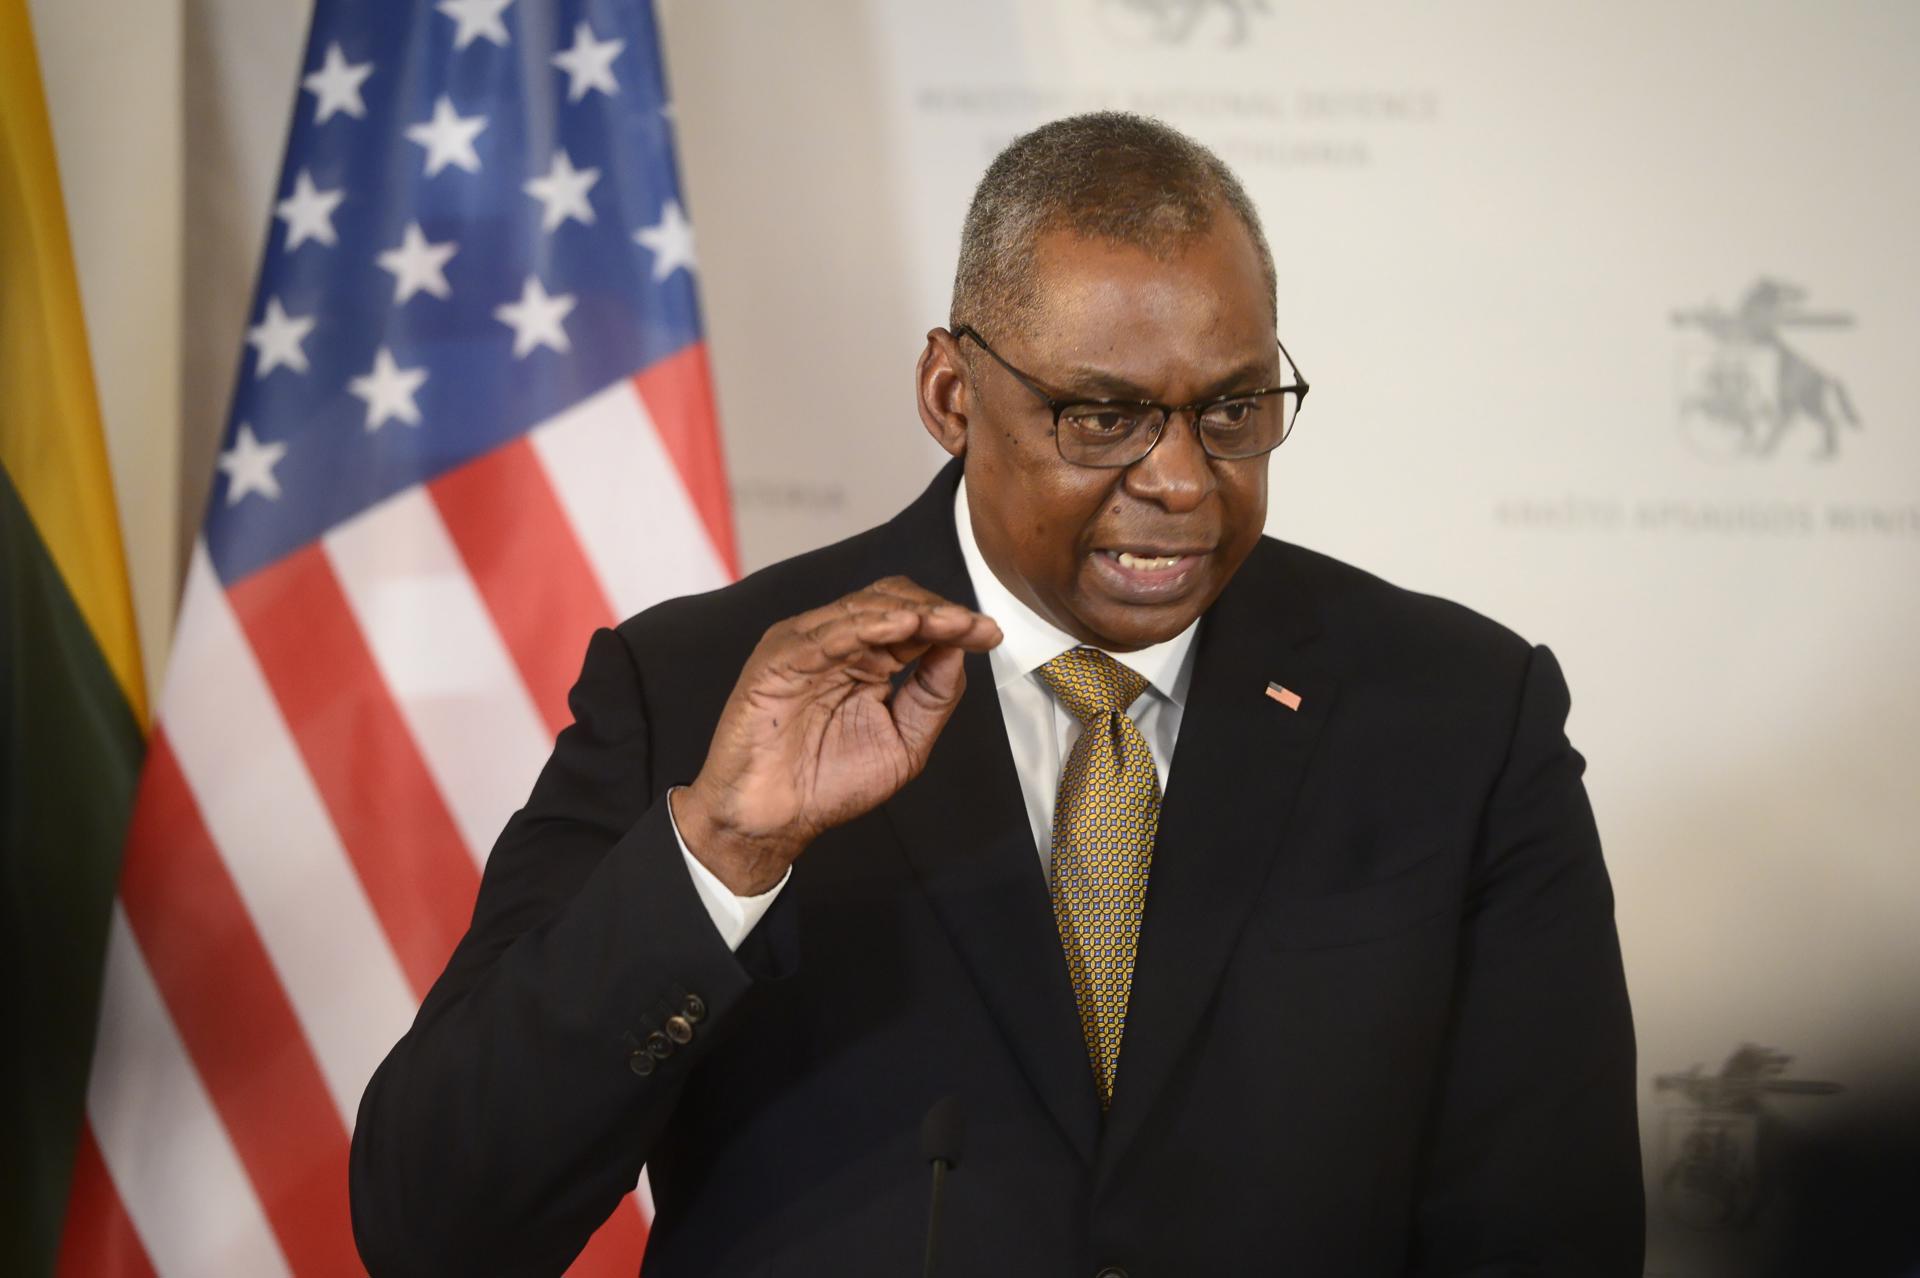 US Defense Secretary Lloyd Austin attends a press conference after his meeting with Lithuanian Foreign Affairs Minister Gabrielius Landsbergis in Vilnius, Lithuania, 19 February 2022. EFE-EPA/VALDEMAR DOVEIKO POLAND OUT[POLAND OUT]